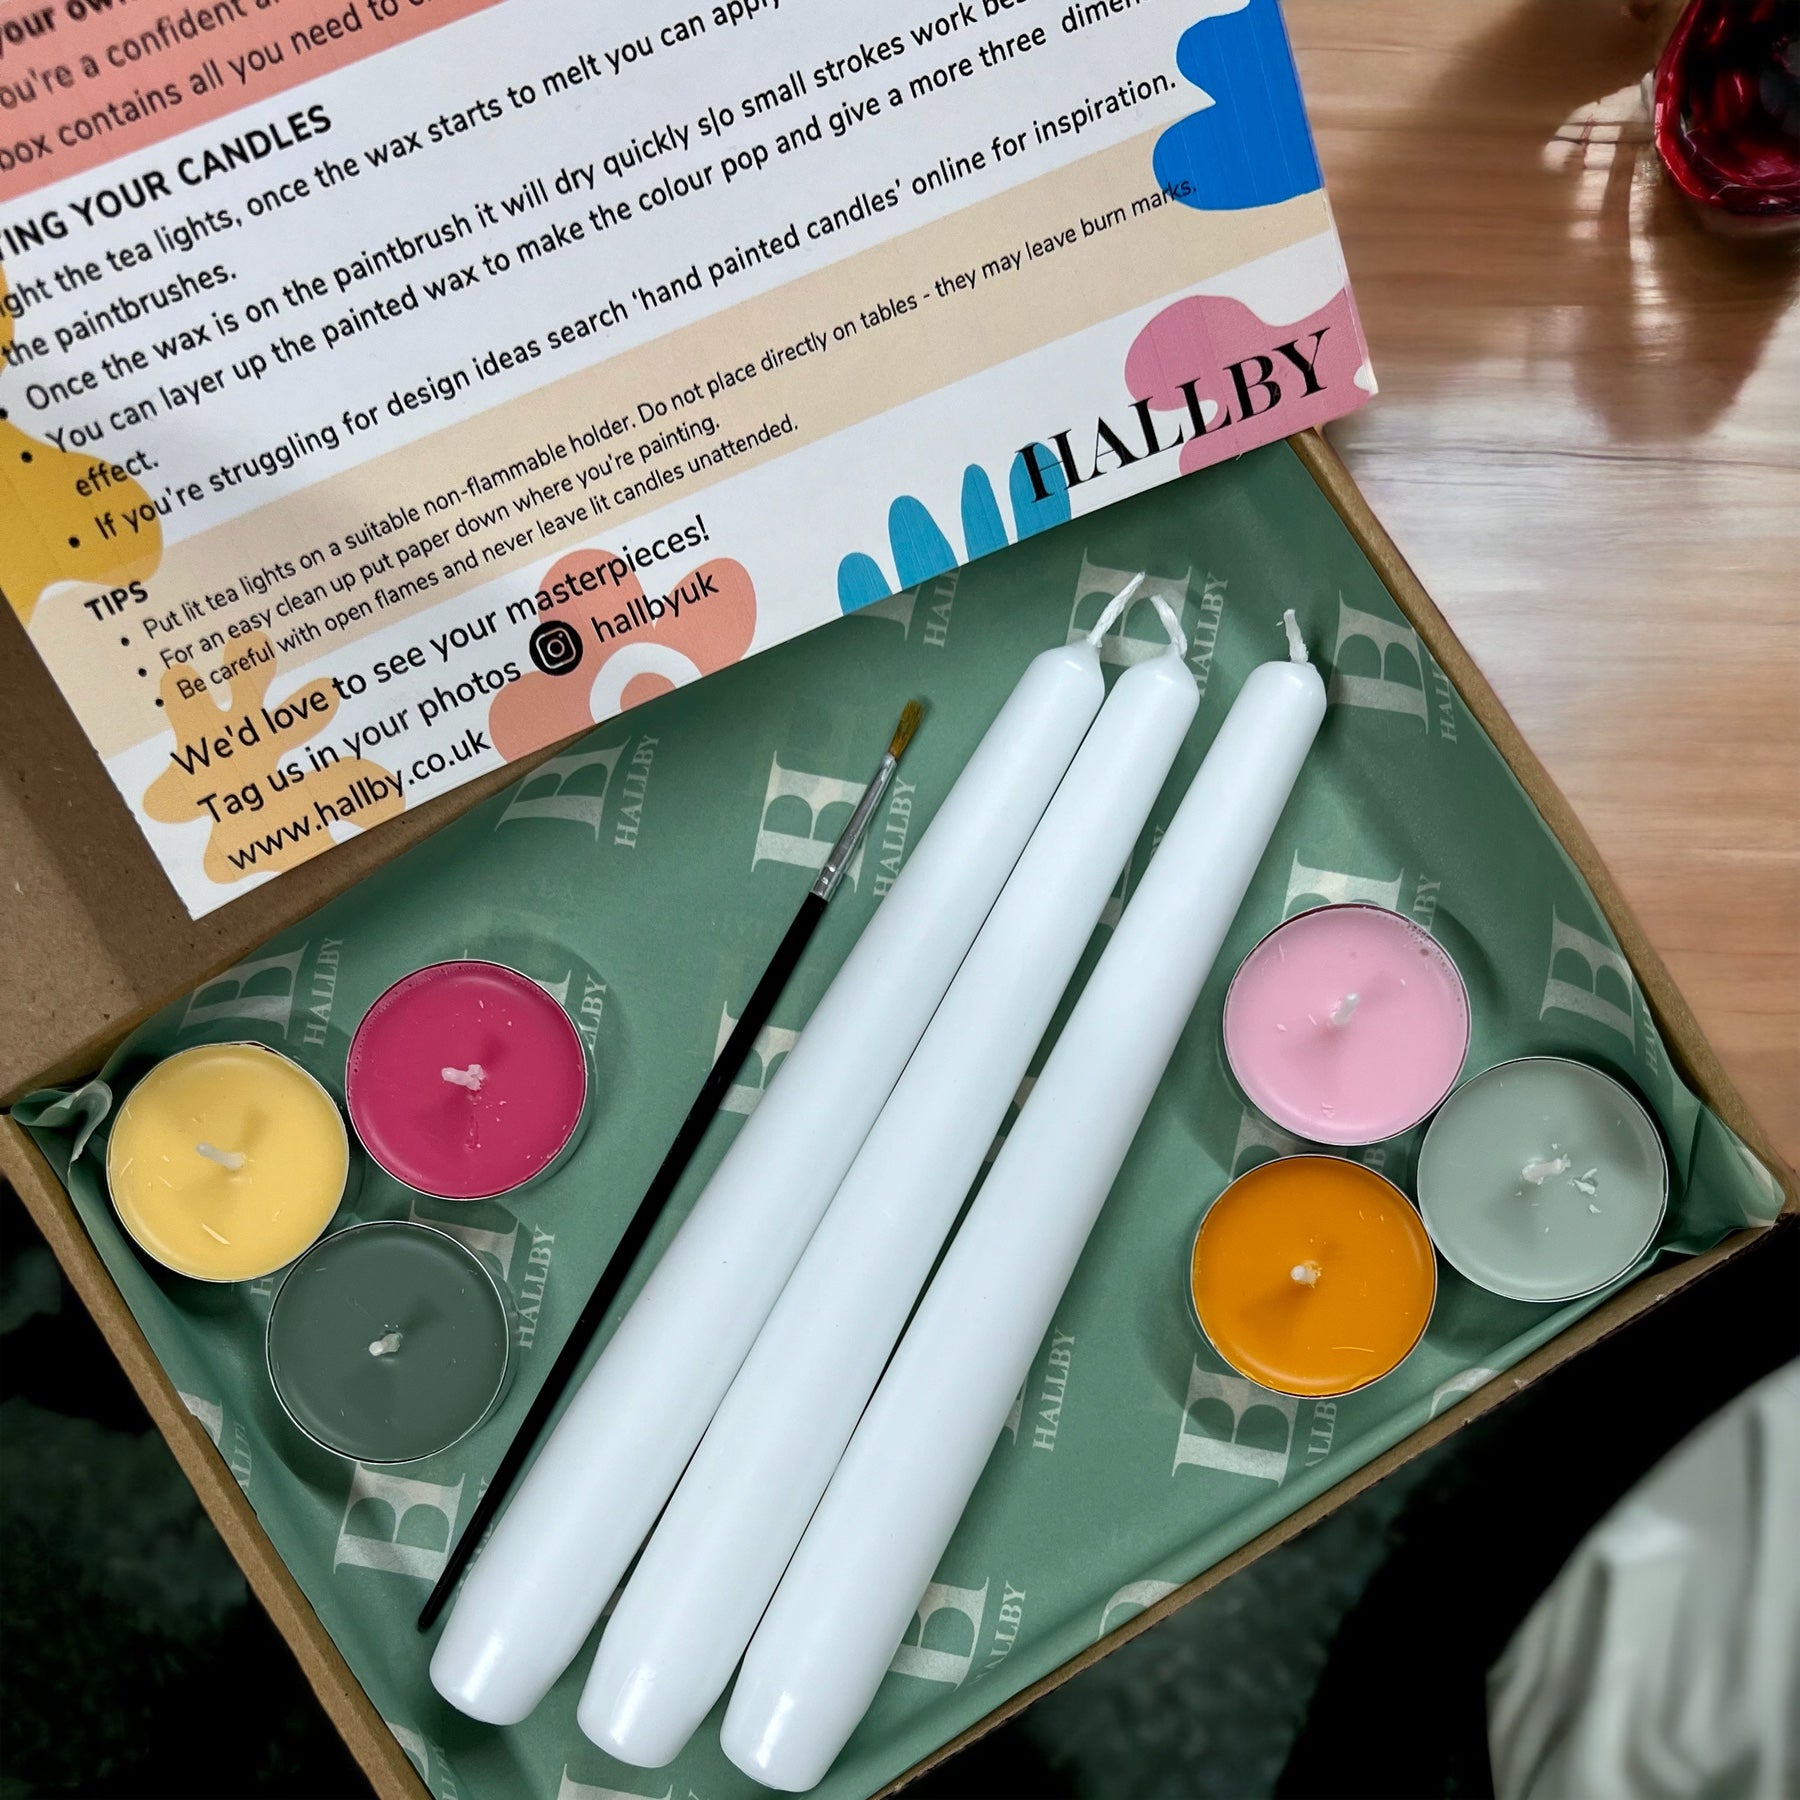 Paint your own candles kit - Summer